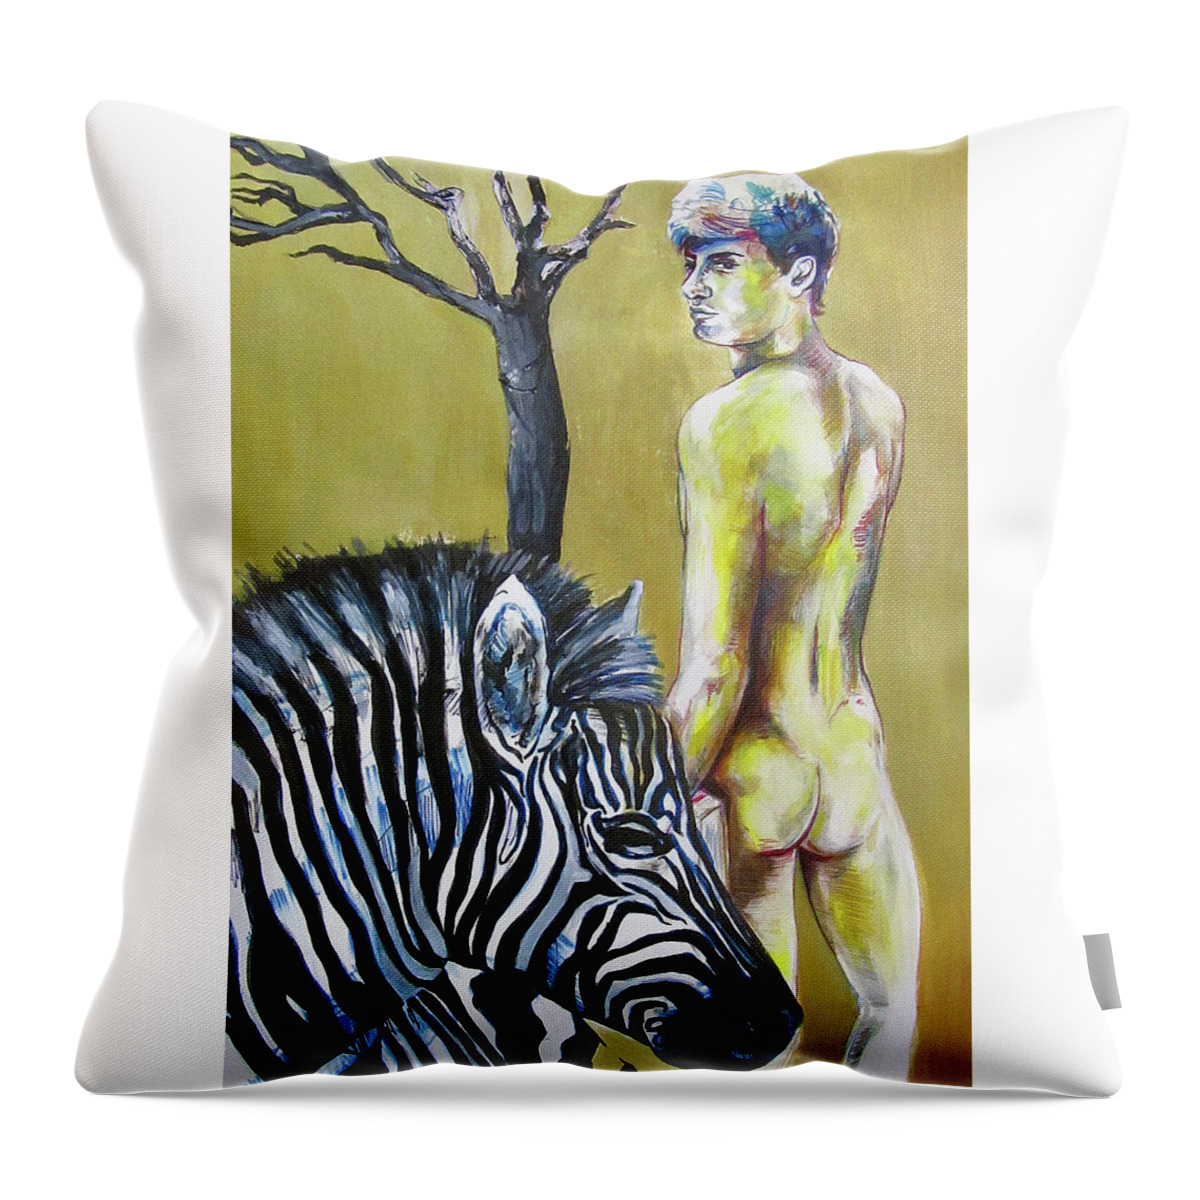 Zebra Throw Pillow featuring the painting Golden Zebra High Noon by Rene Capone